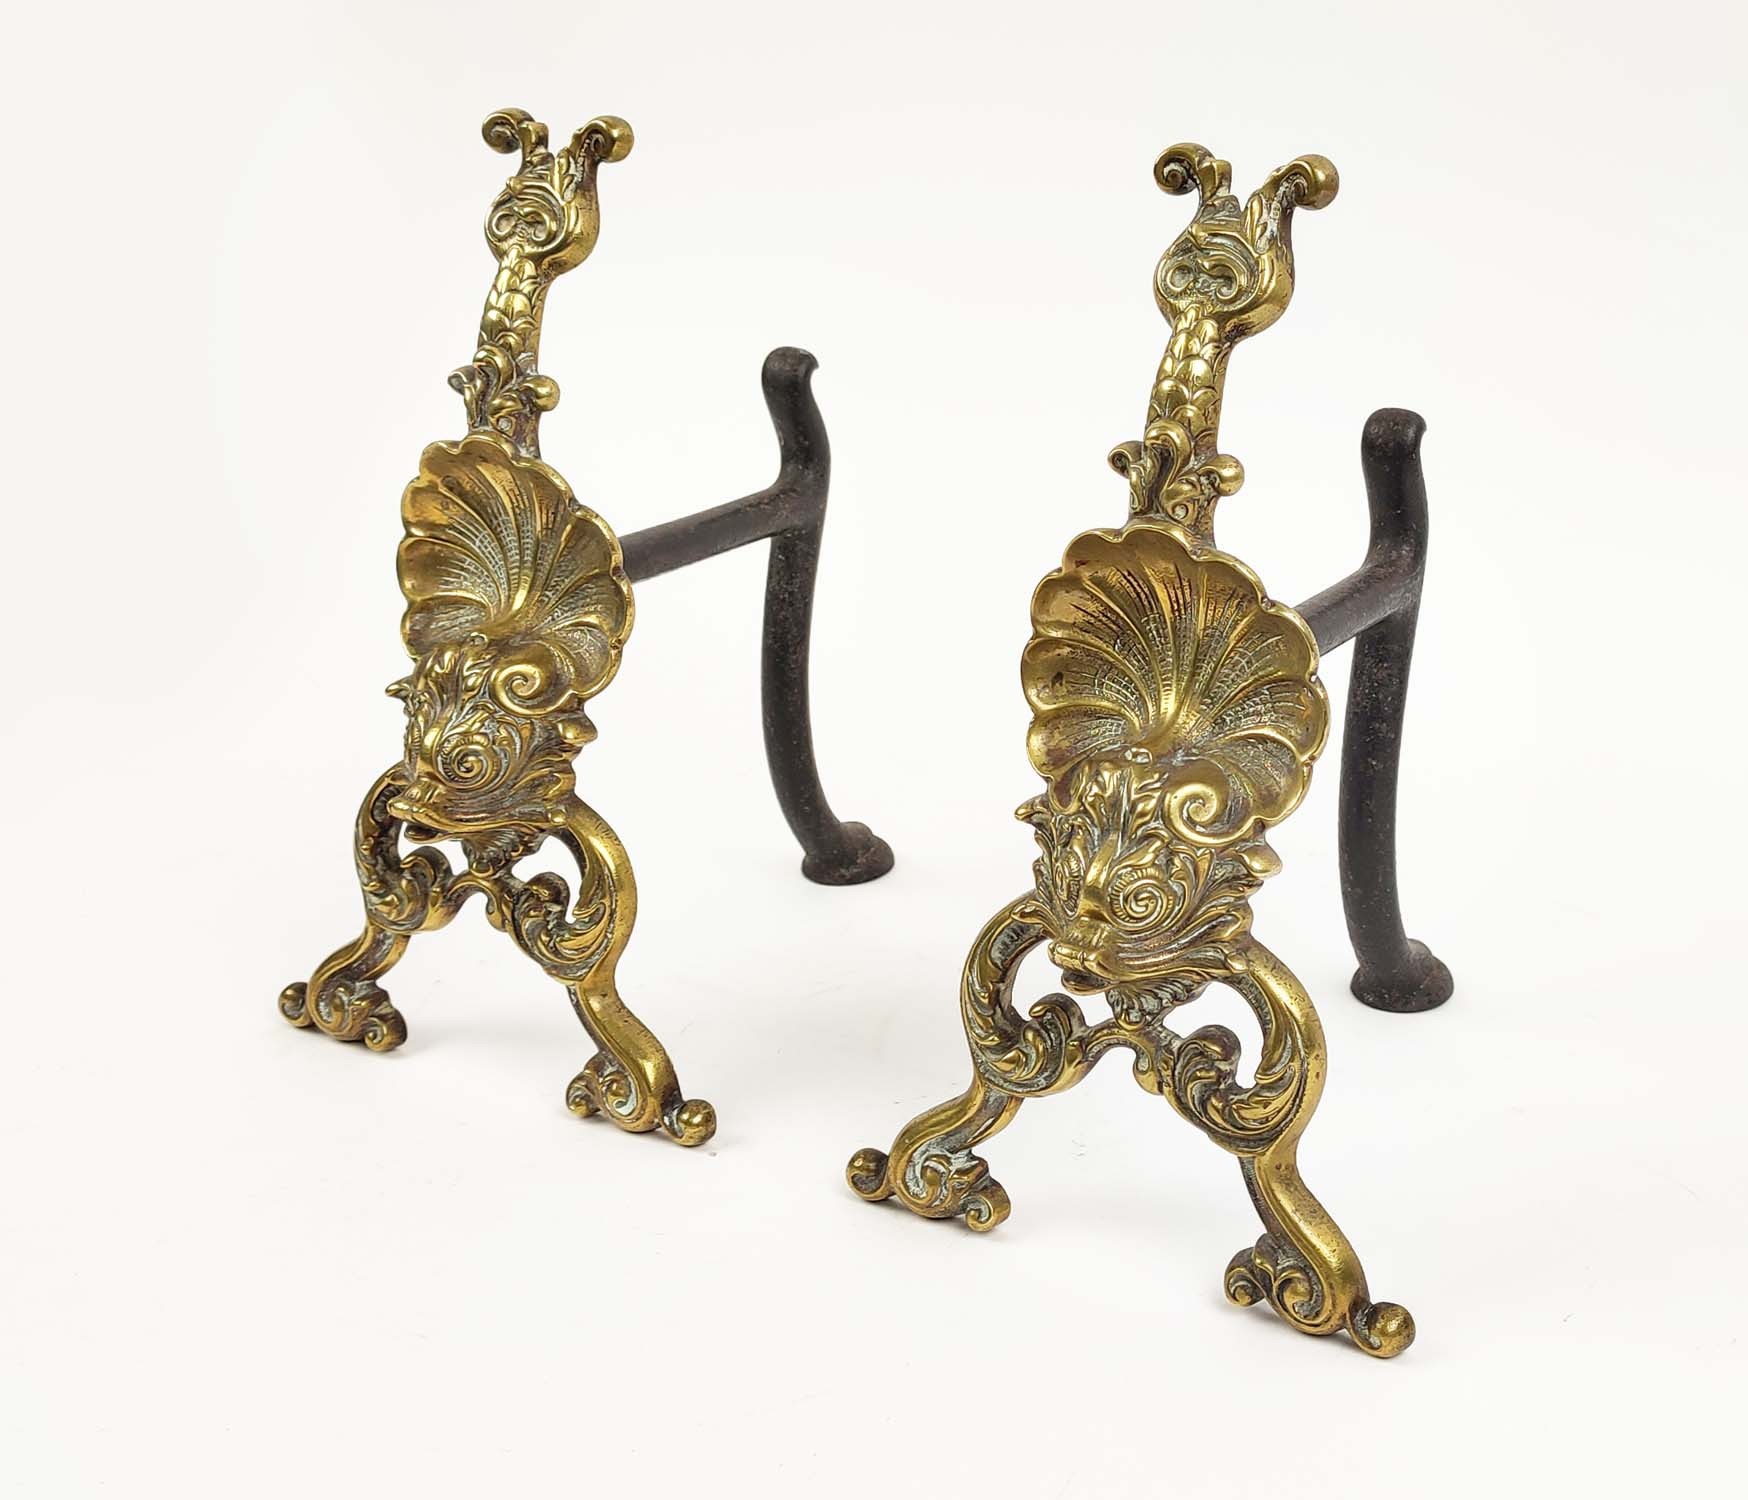 A PAIR OF VICTORIAN BRASS FIRE DOGS, made by William Tonks and Sons, circa 1880, 27cm H x 22cm D.